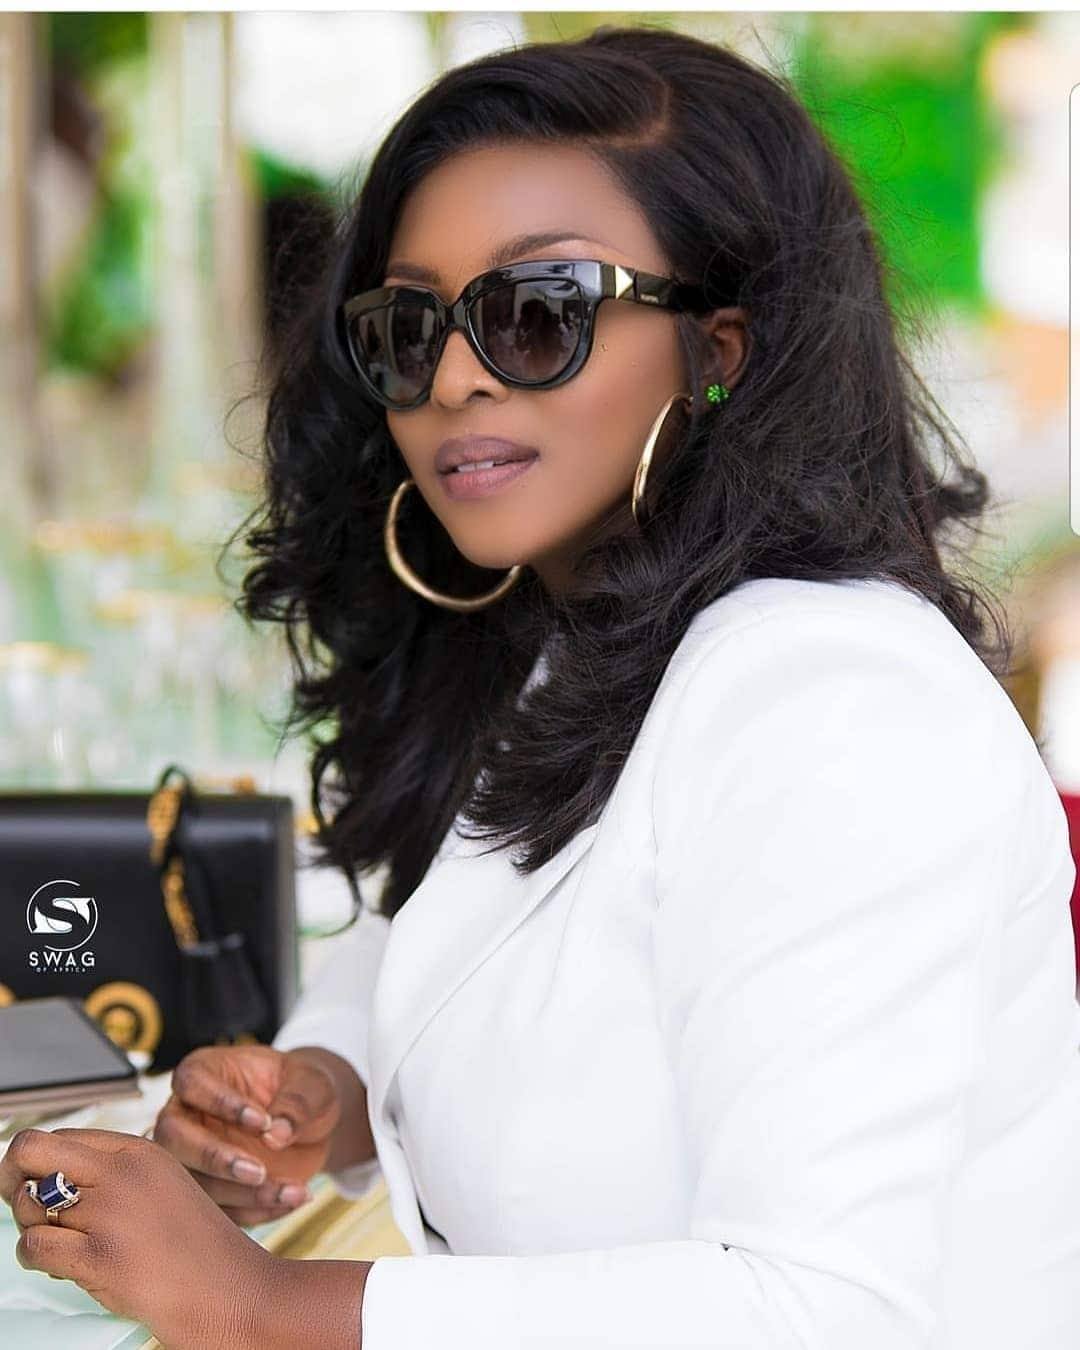 I'm not ready for marriage - Yvonne Okoro reveals why